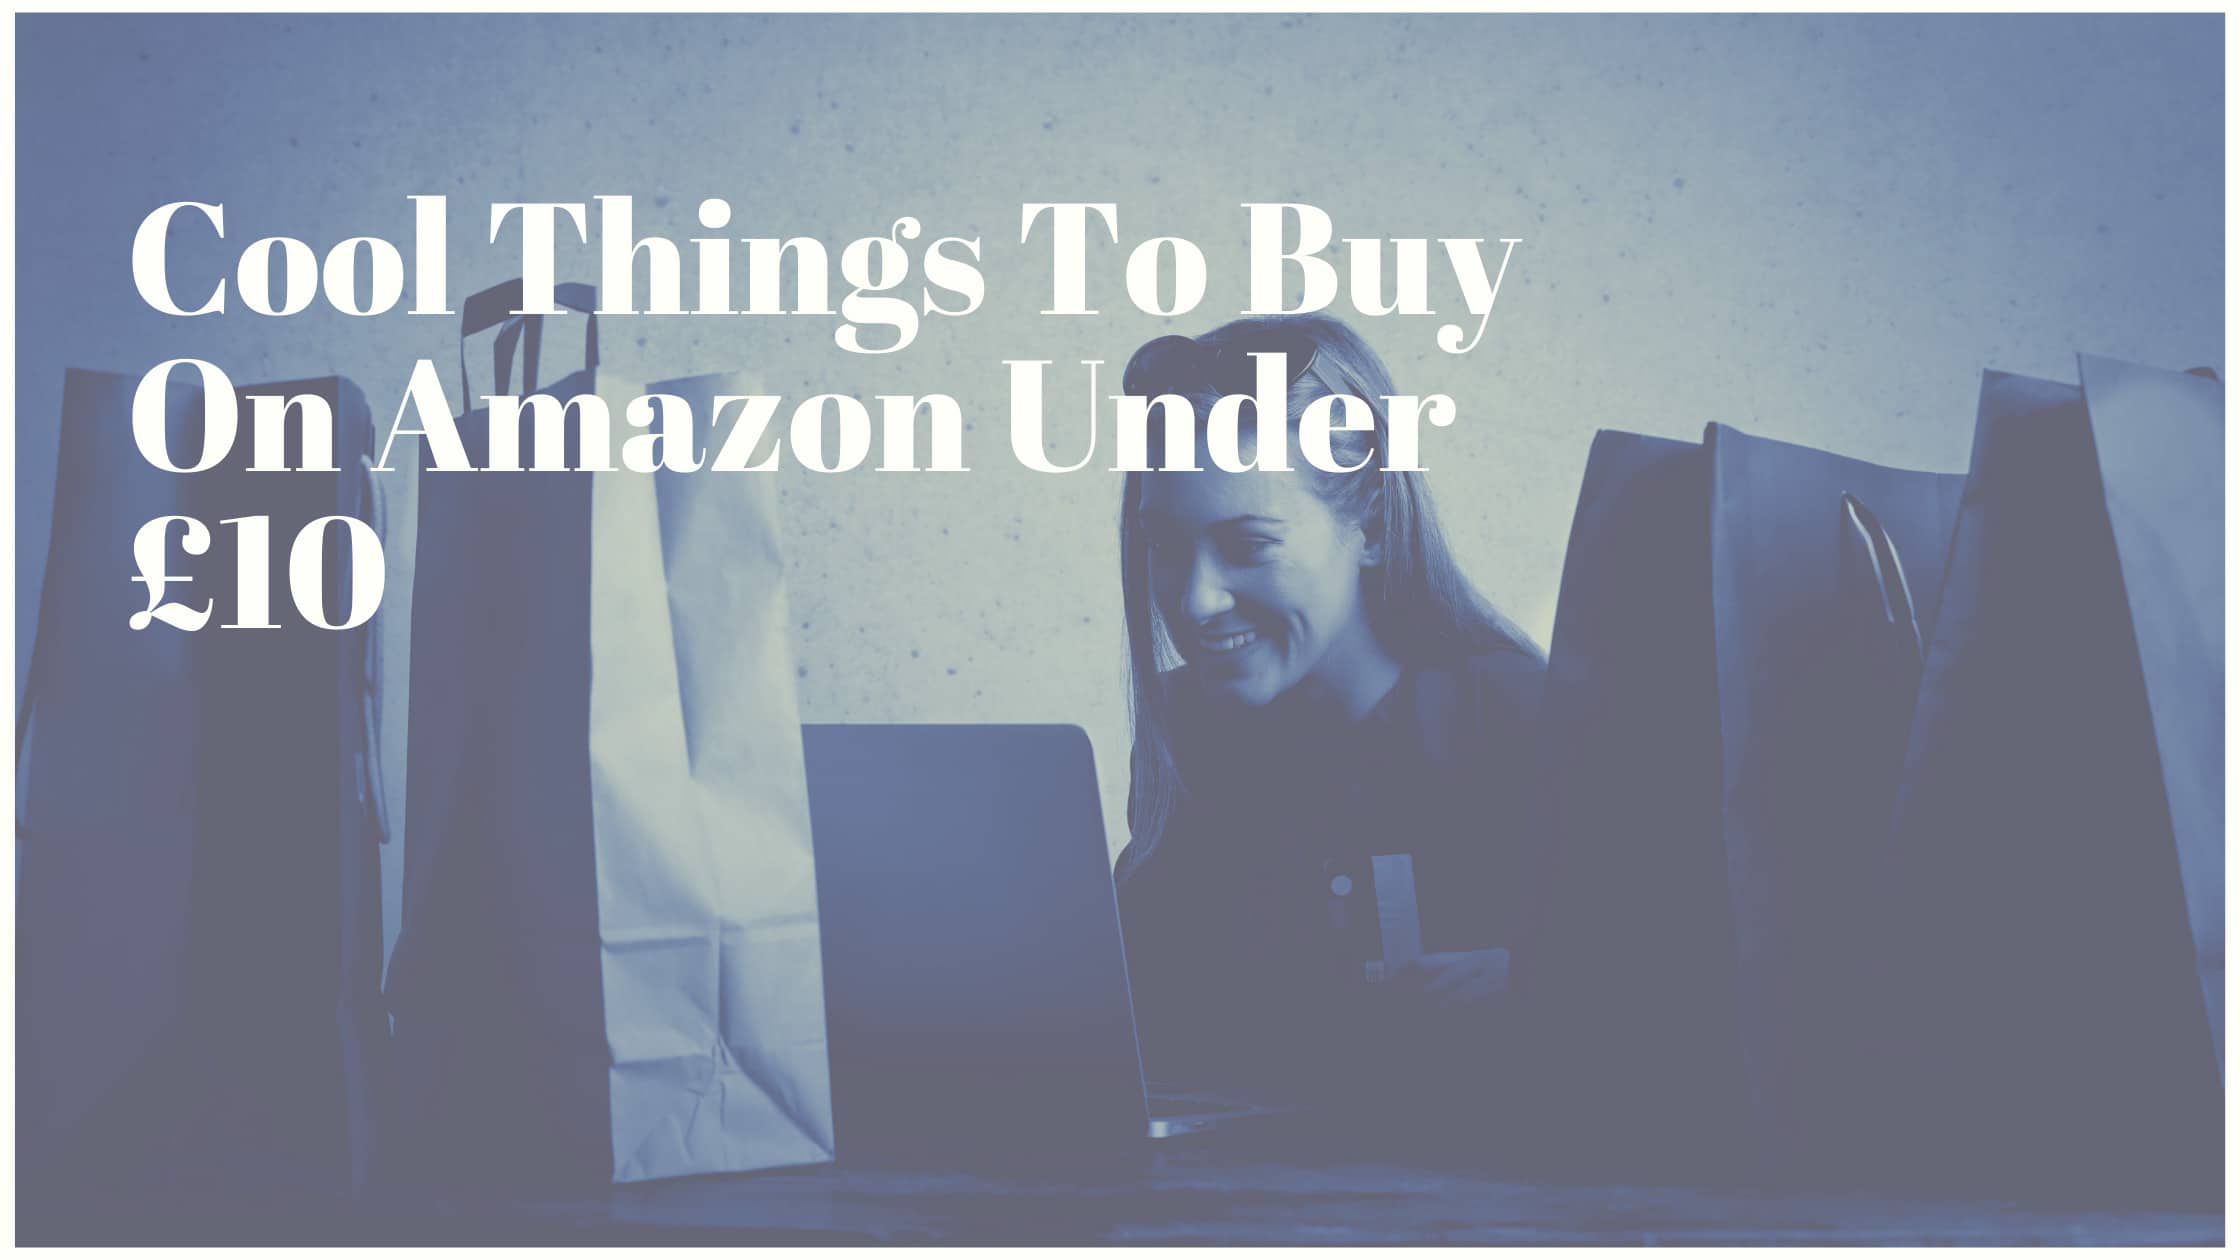 Cool Things To Buy On Amazon Under £10